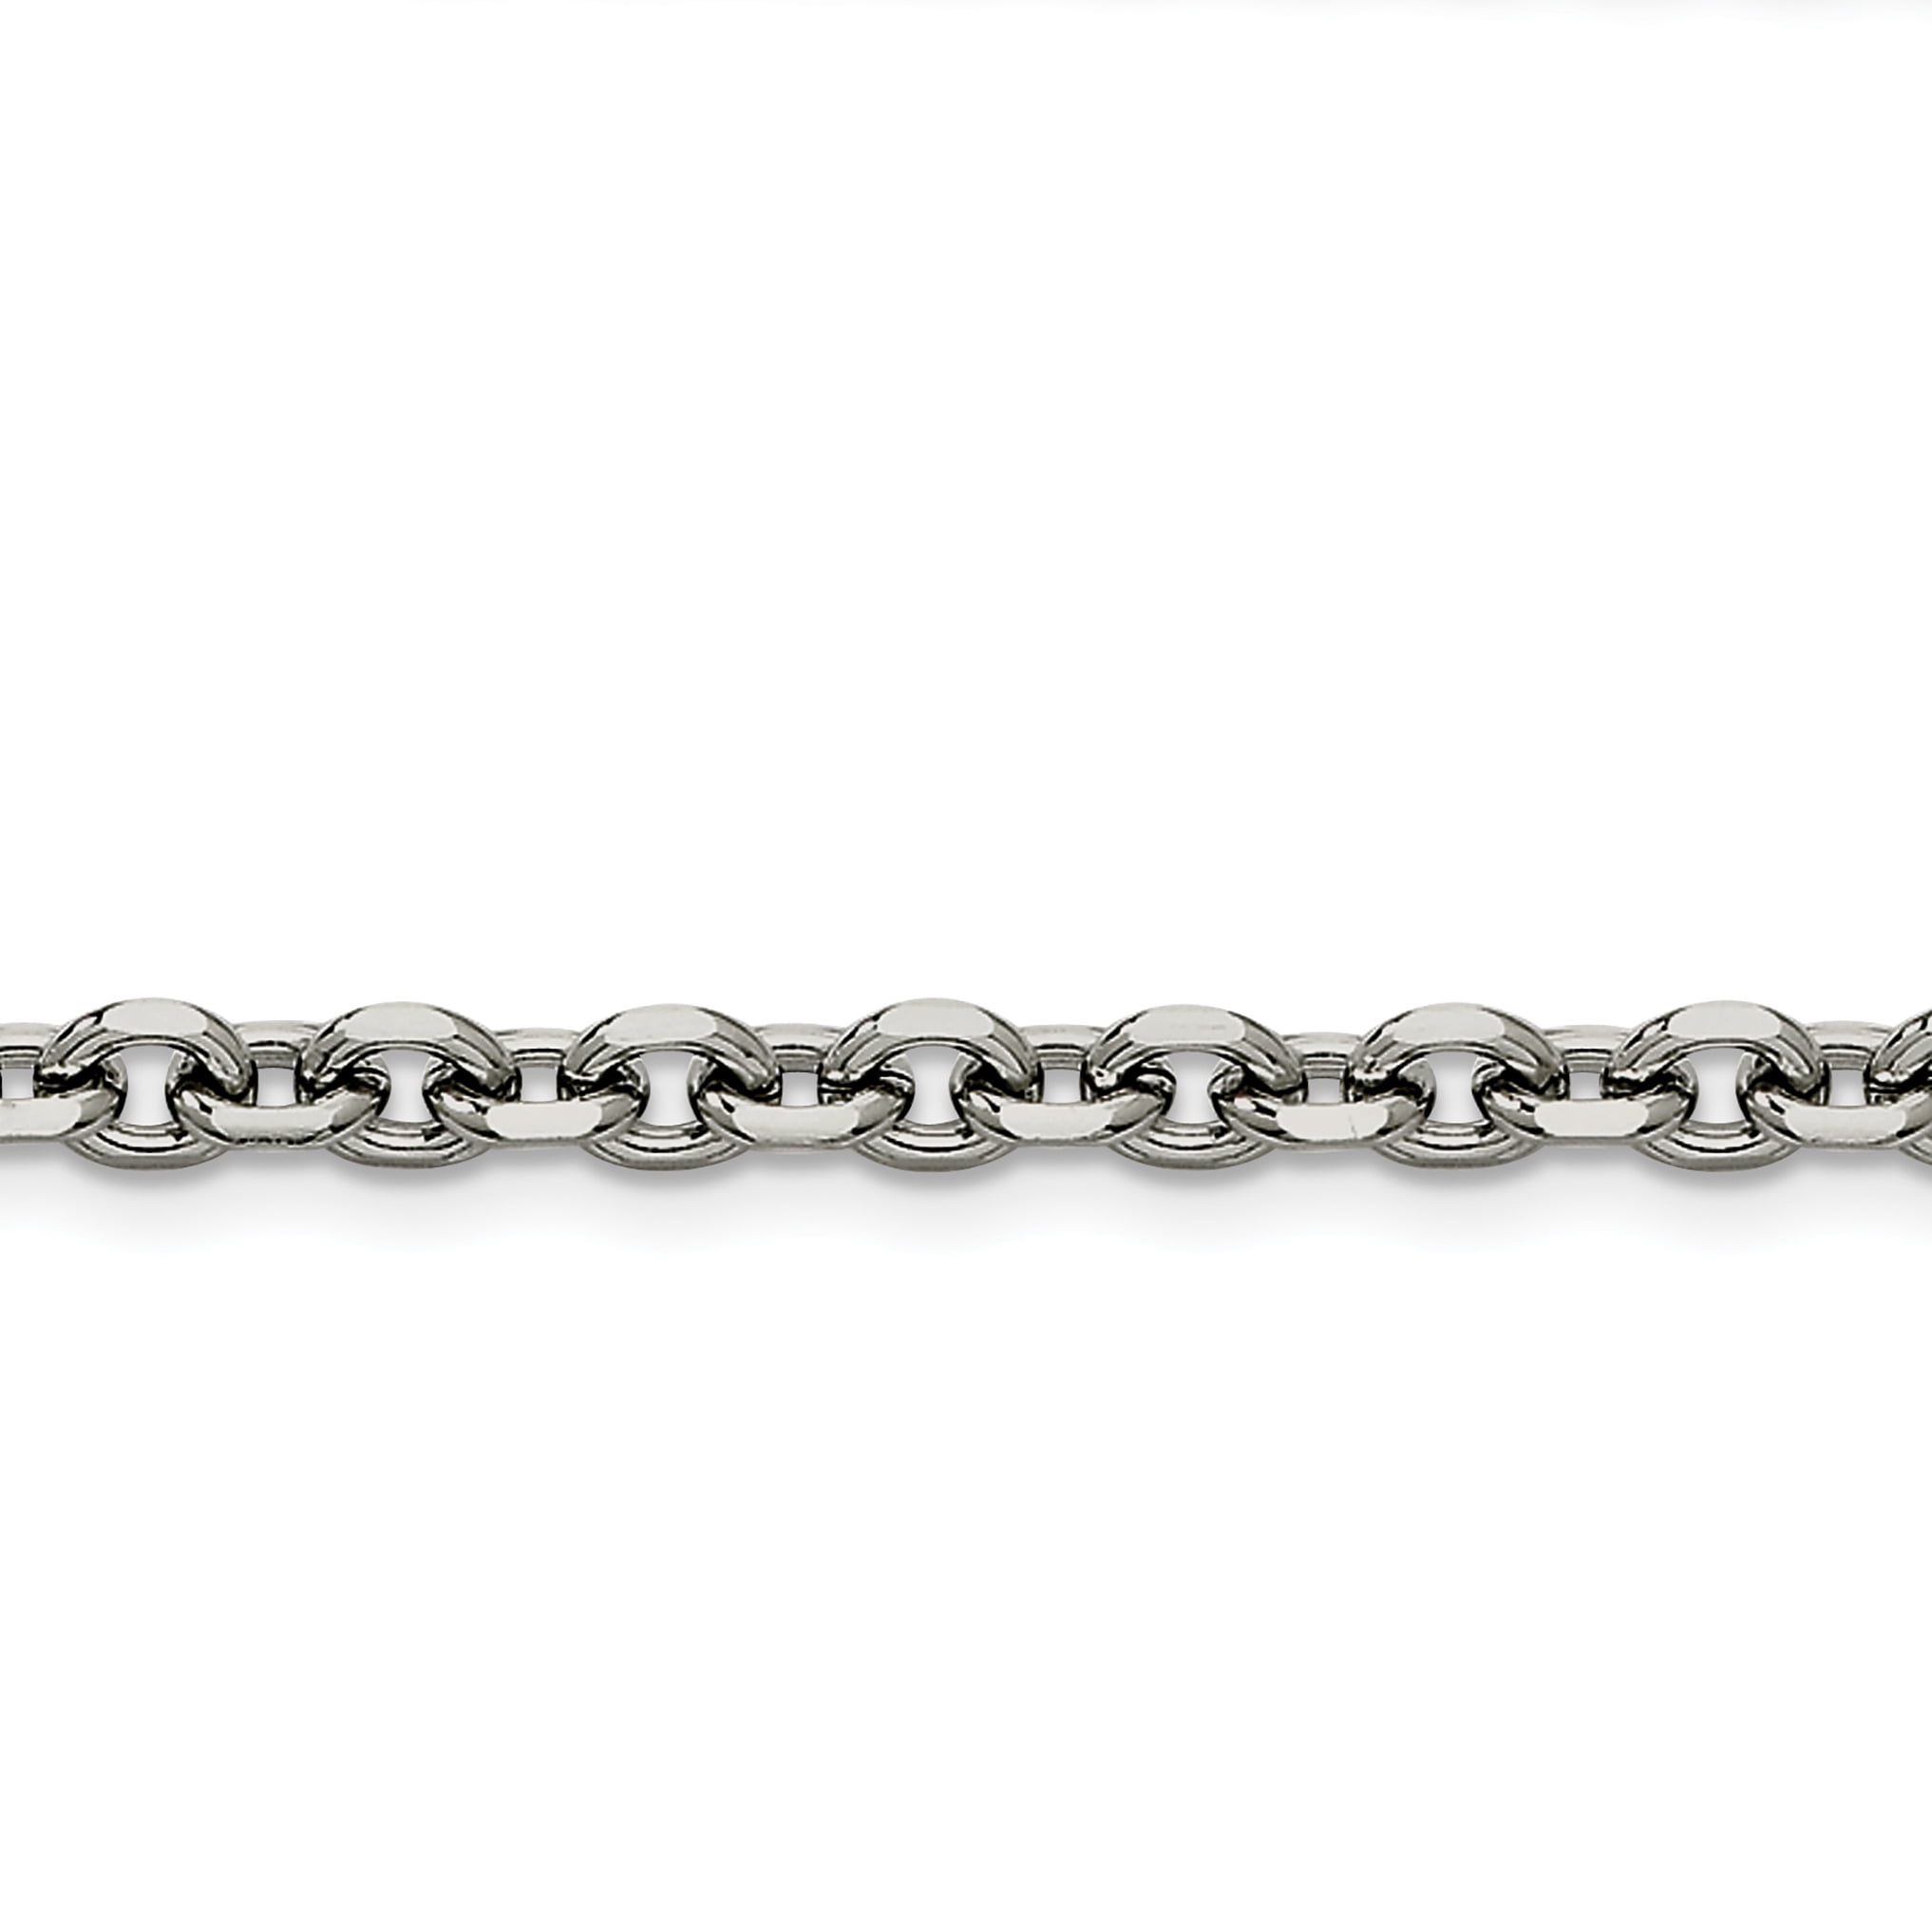 Jewelry Necklaces Chains Stainless Steel 5.3mm 22in Cable Chain